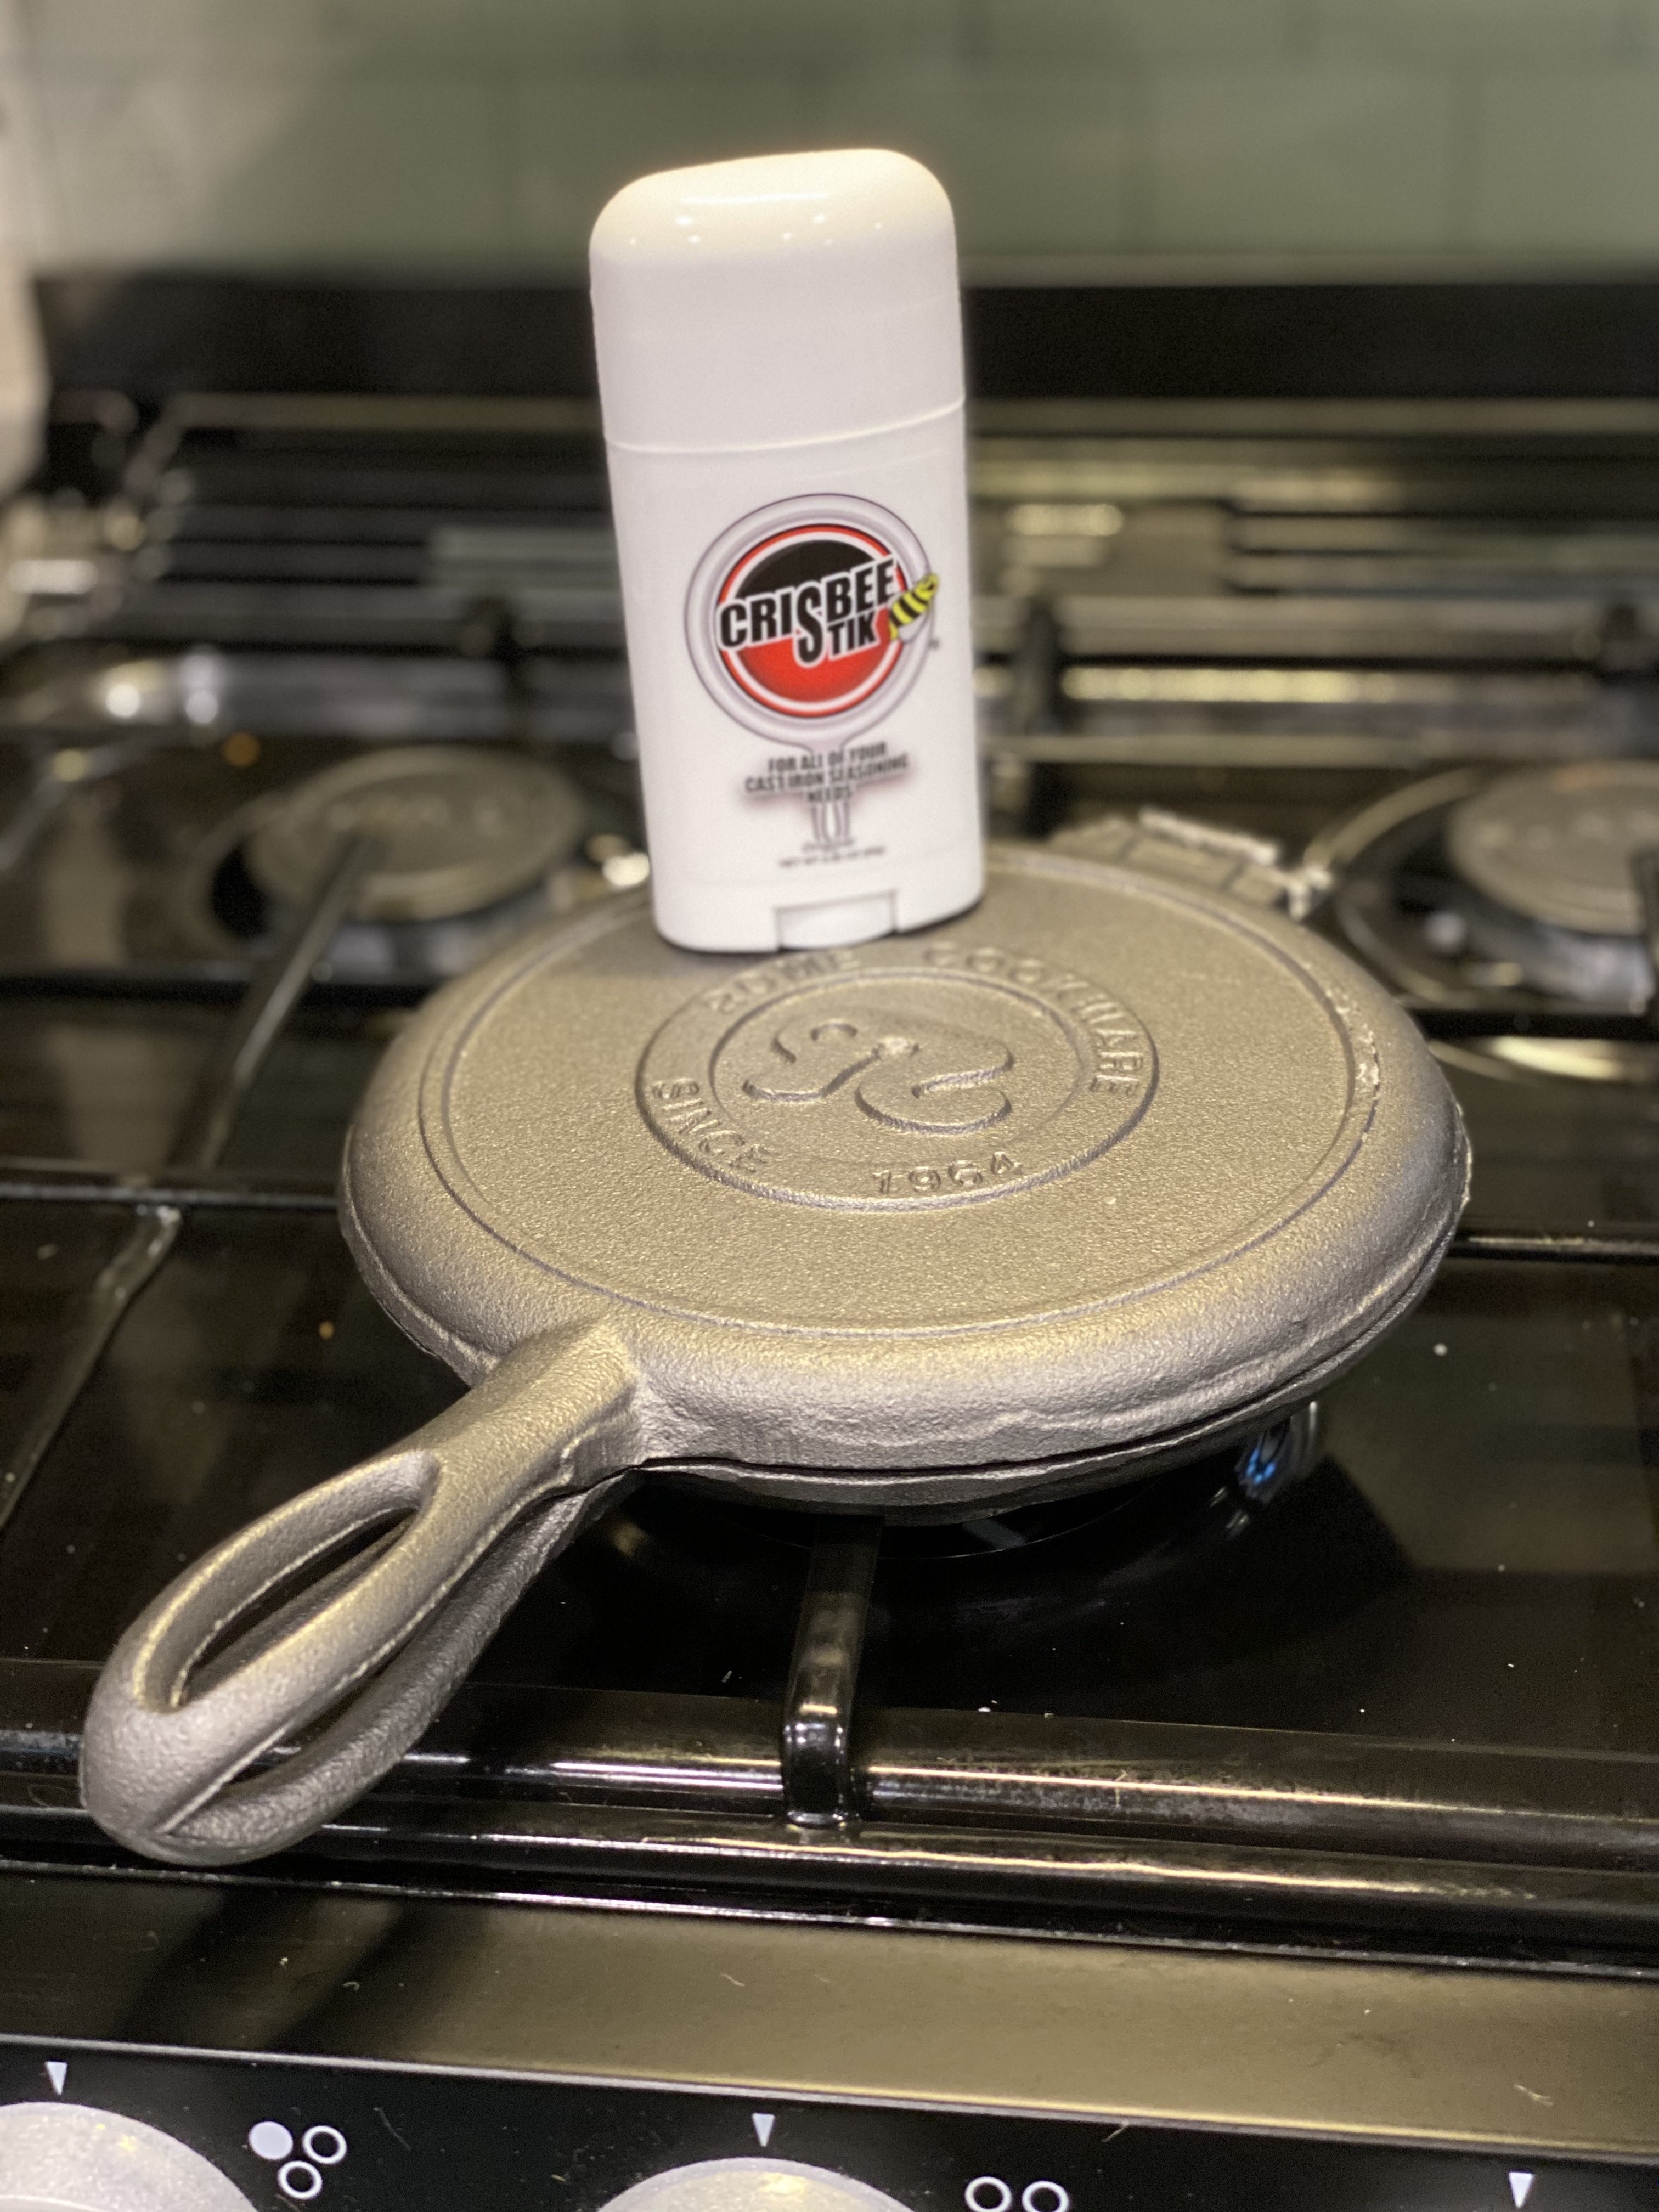 How to Season Your Cast Iron on a Stove